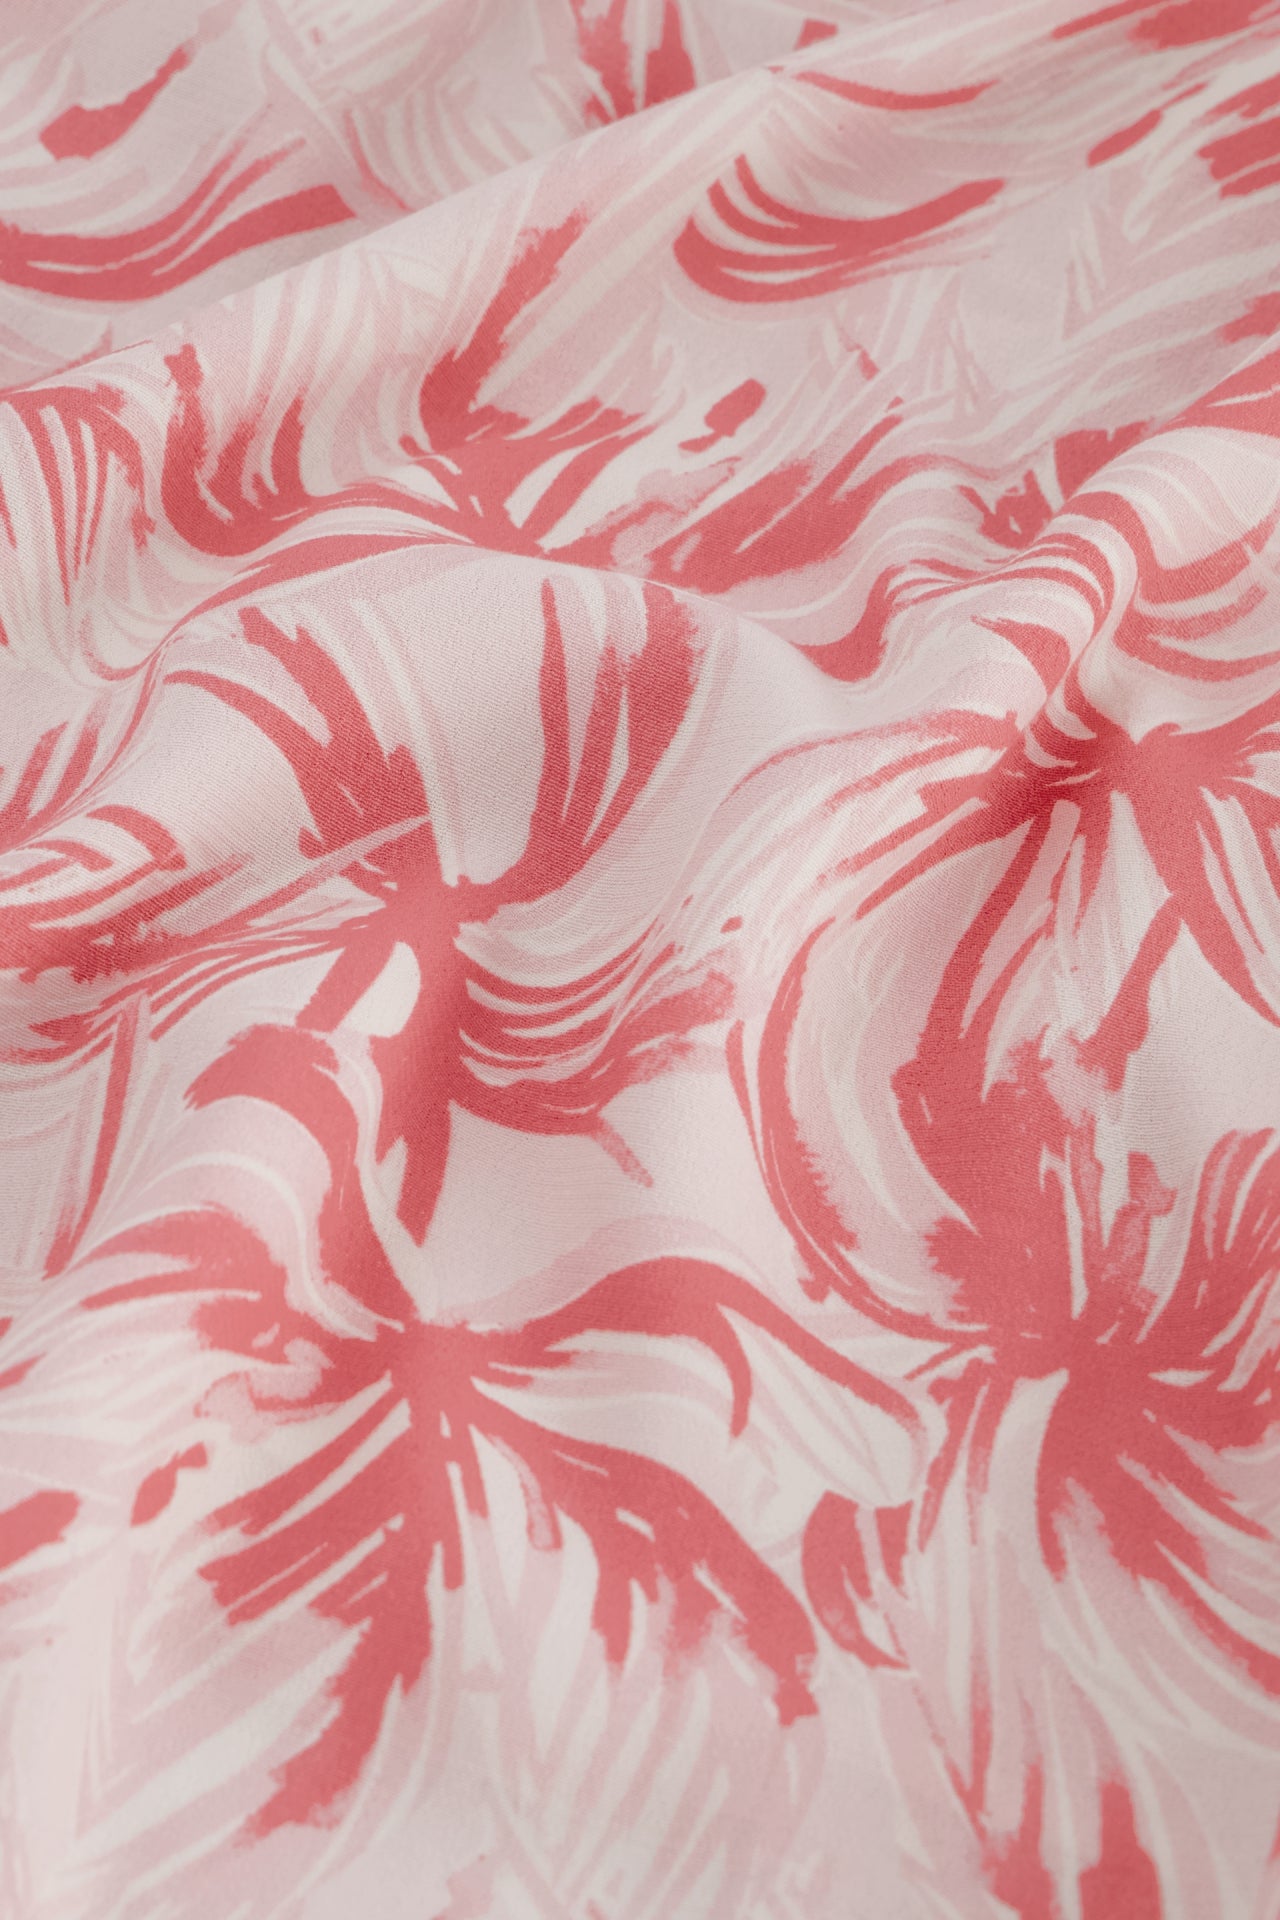 A close up of the Eline Top - Palmeraie Mini by Fabienne Chapot, a pink floral print fabric.